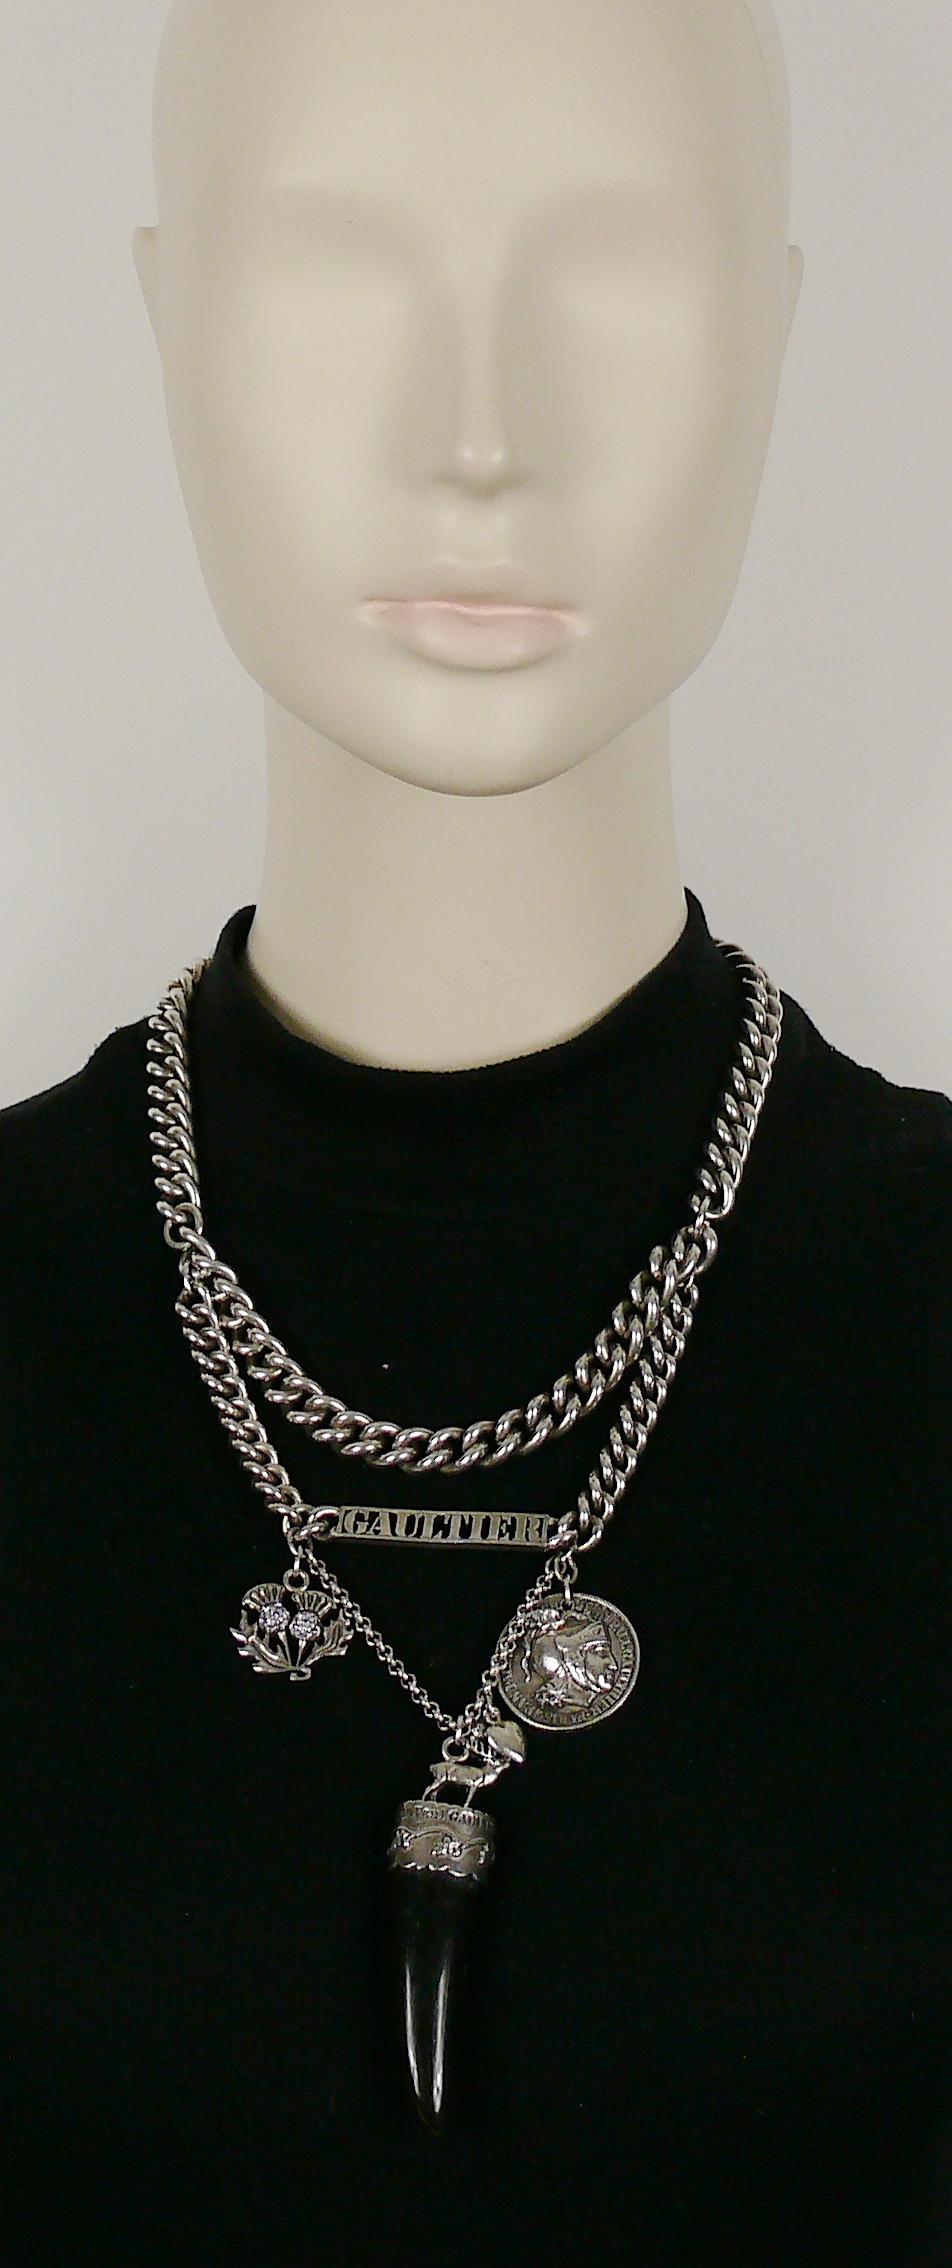 JEAN PAUL GAULTIER silver toned curb chain necklace featuring GAULTIER ID tag and charms  : faux horn tooth claw, jewelled thistles, heart, acorn, Roman centurion coin.

Lobster clasp closure.

Embossed JEAN PAUL GAULTIER.

Indicative measurements :